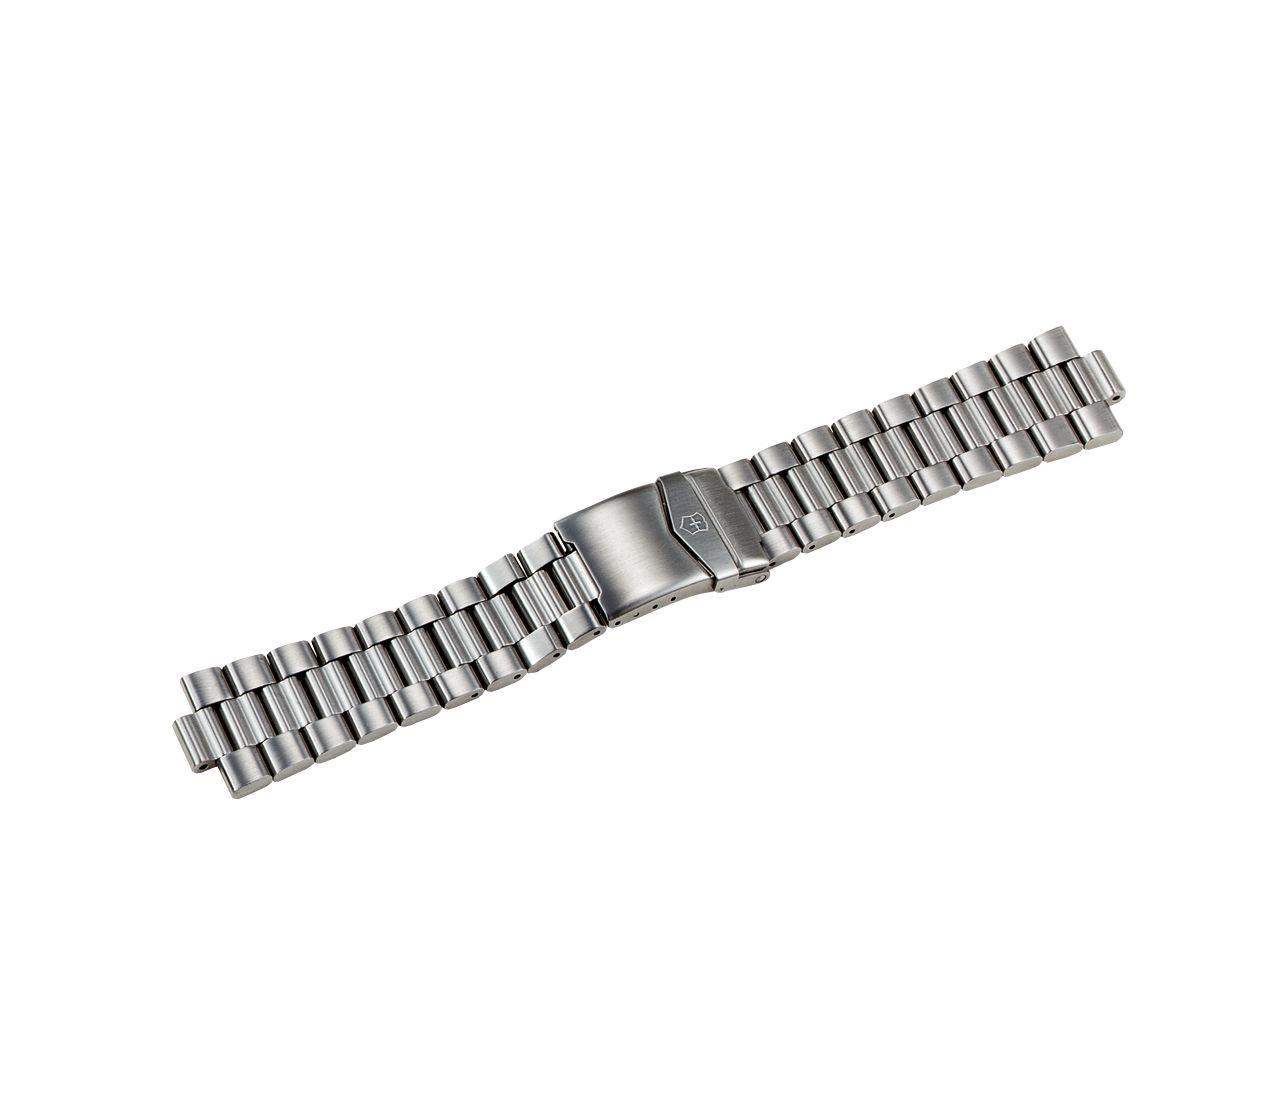 Bracelet with - 9.05 - Victorinox Stainless mm Summit - clasp in mm Large 0 Steel 000782 XLT